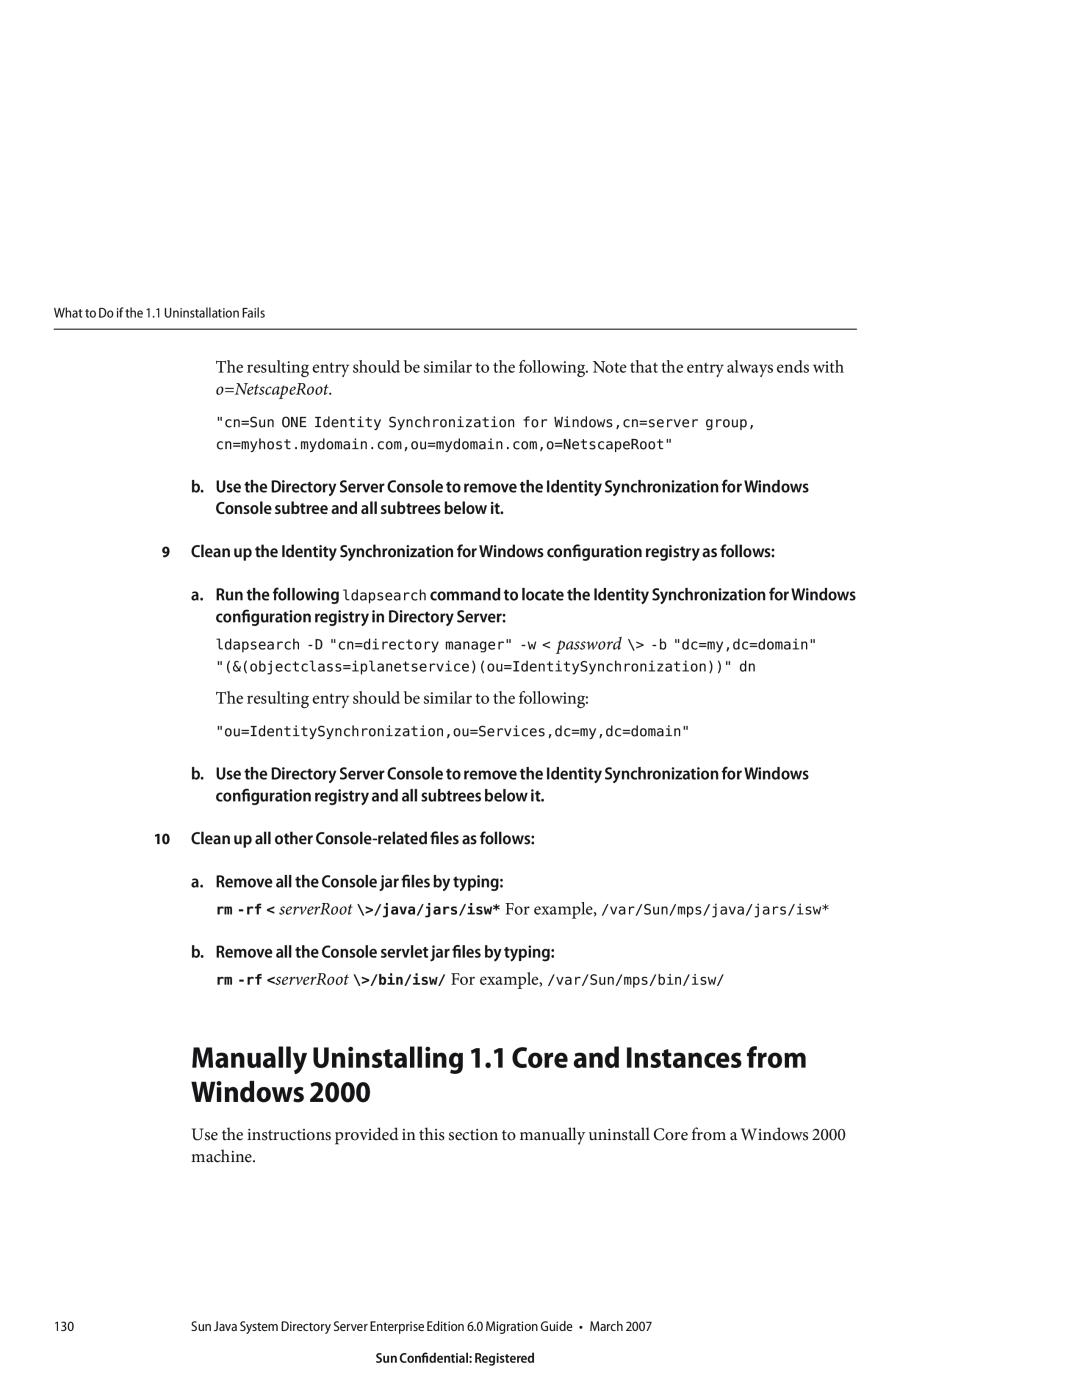 Sun Microsystems 8190994 manual Manually Uninstalling 1.1 Core and Instances from Windows 